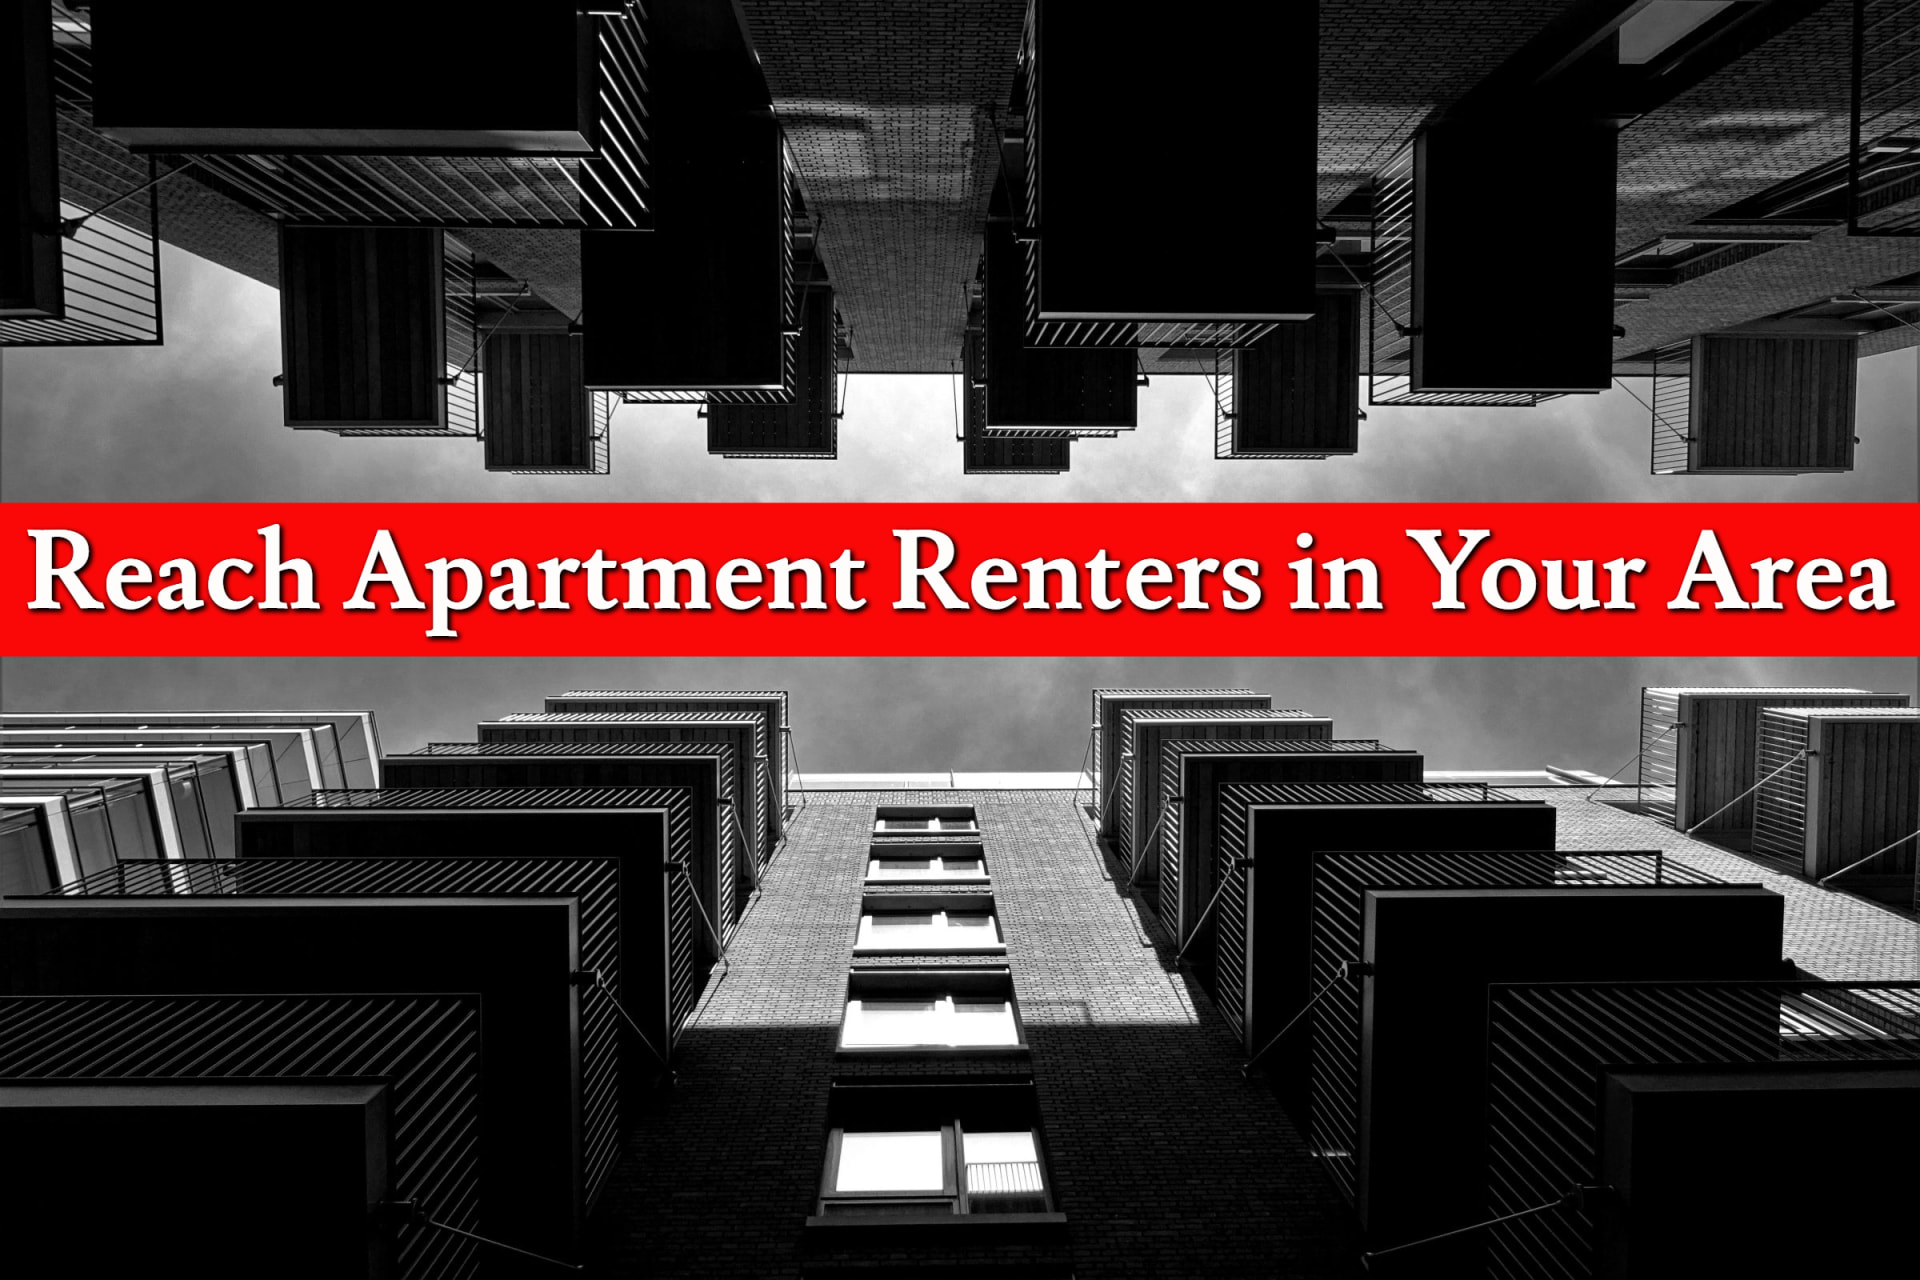 Lists of People Who Rent Apartments Around Your Business